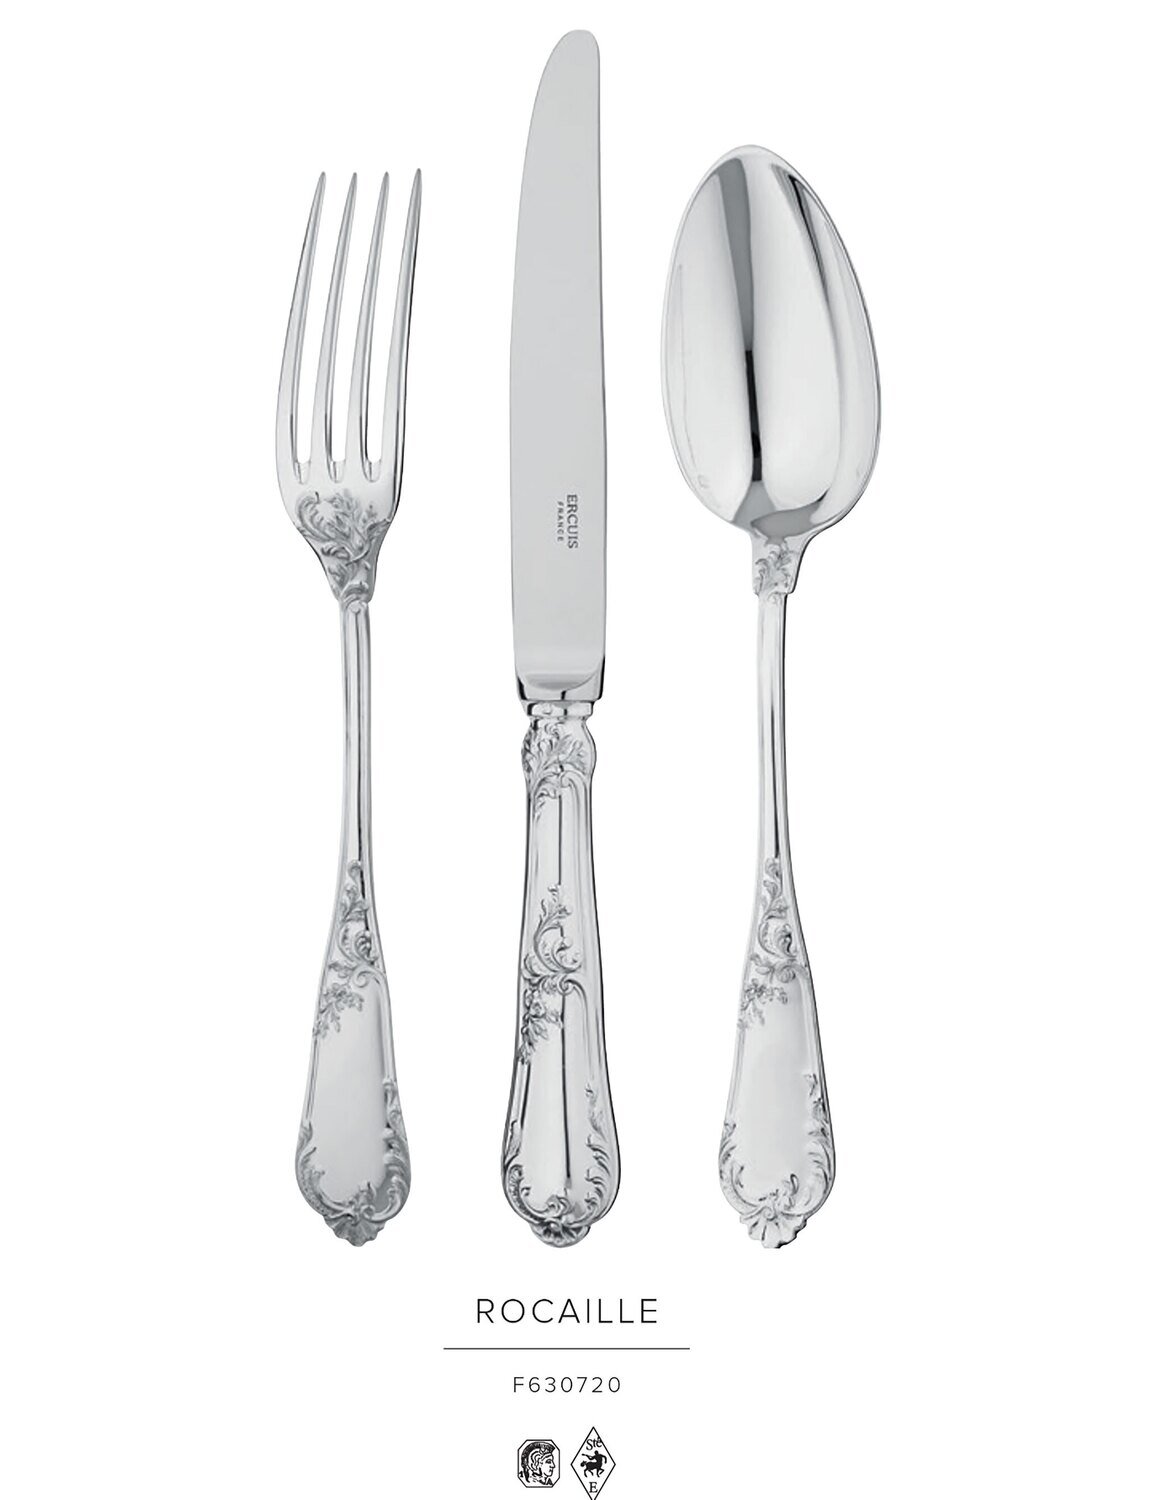 Ercuis Rocaille Children Flatware 3 Pieces In A Giftbox Sterling Silver F630720-CP